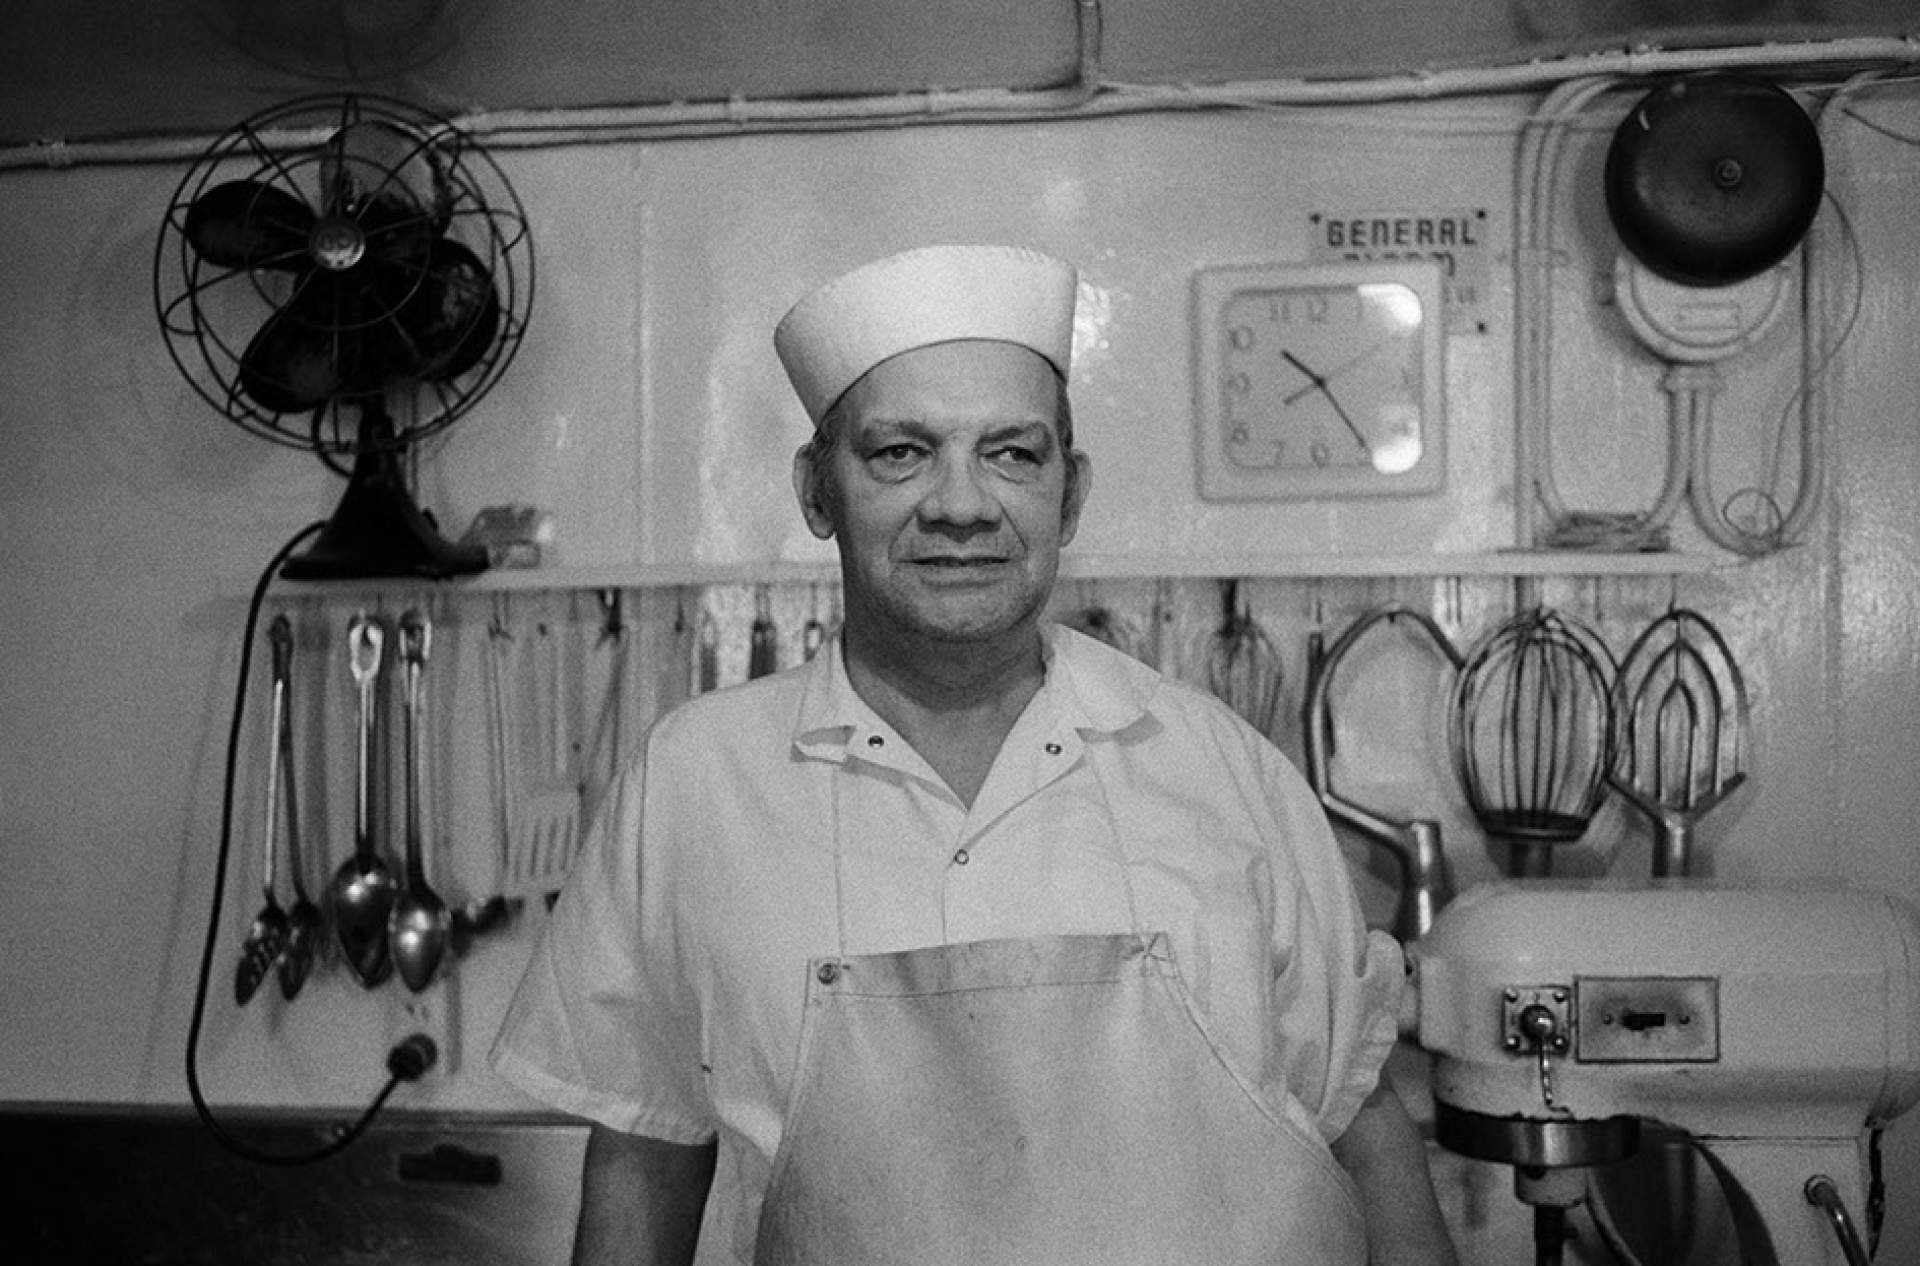 Ship’s Cook from the Grain Scoopers Series